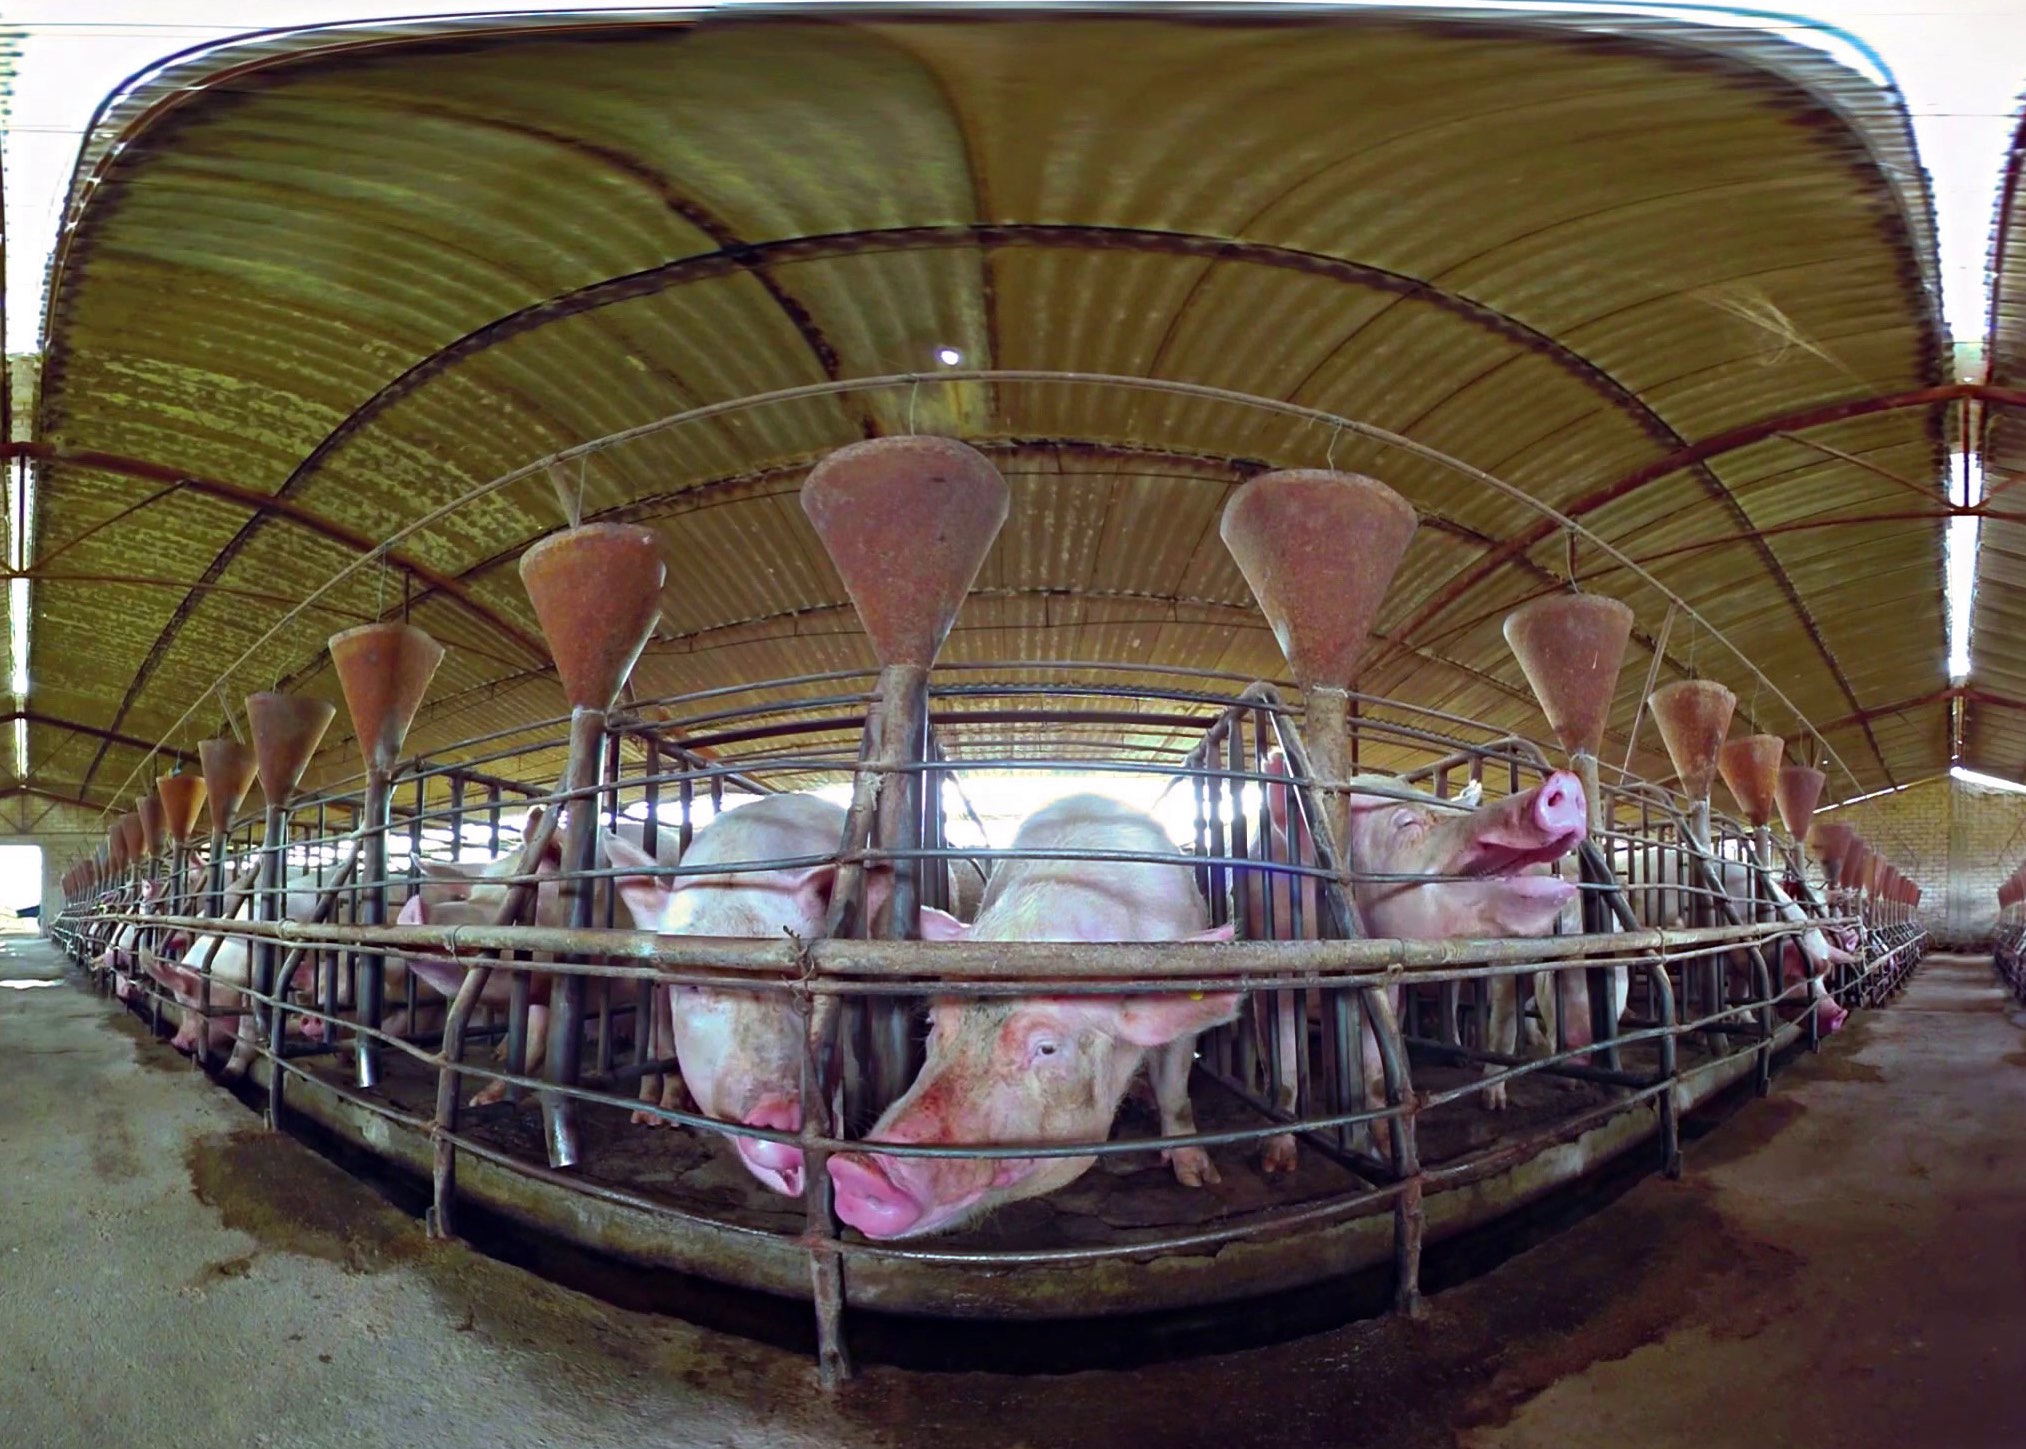 iAnimal: Virtual Immersion Into the Reality of Factory Farming